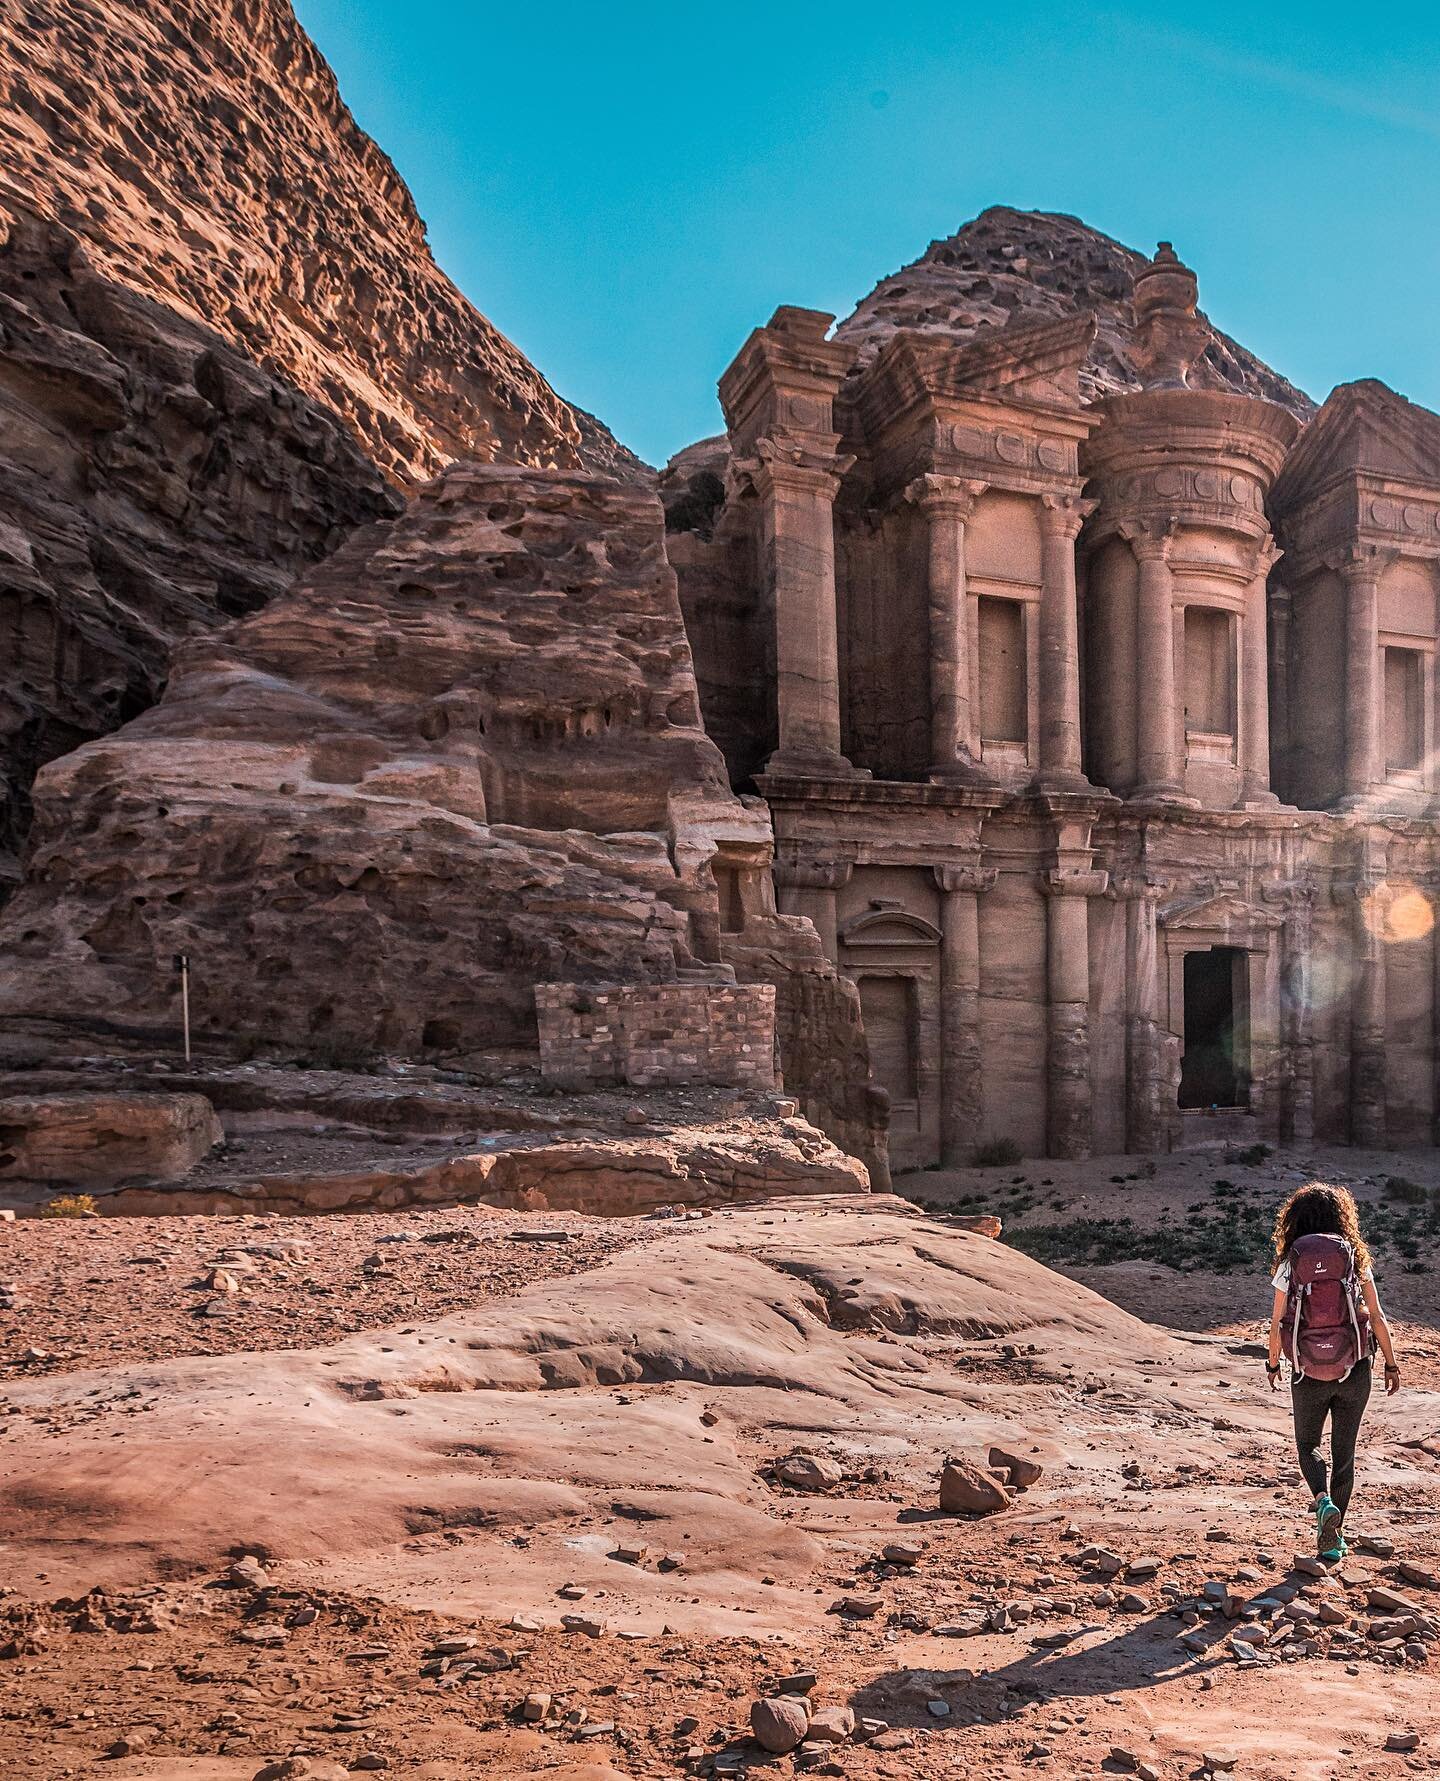 Hidden by time...
👉 Swipe for the full panoramic view
.
.
.
🖼 @farah_qudsi exploring the majestic monastery in Petra .

📸 Captured on assignment for @visitjordan.

📷 Shot with @canonme 5Dm4 (16-35mm f/2.8 )

💻 Edited with Adobe Lightroom Classic